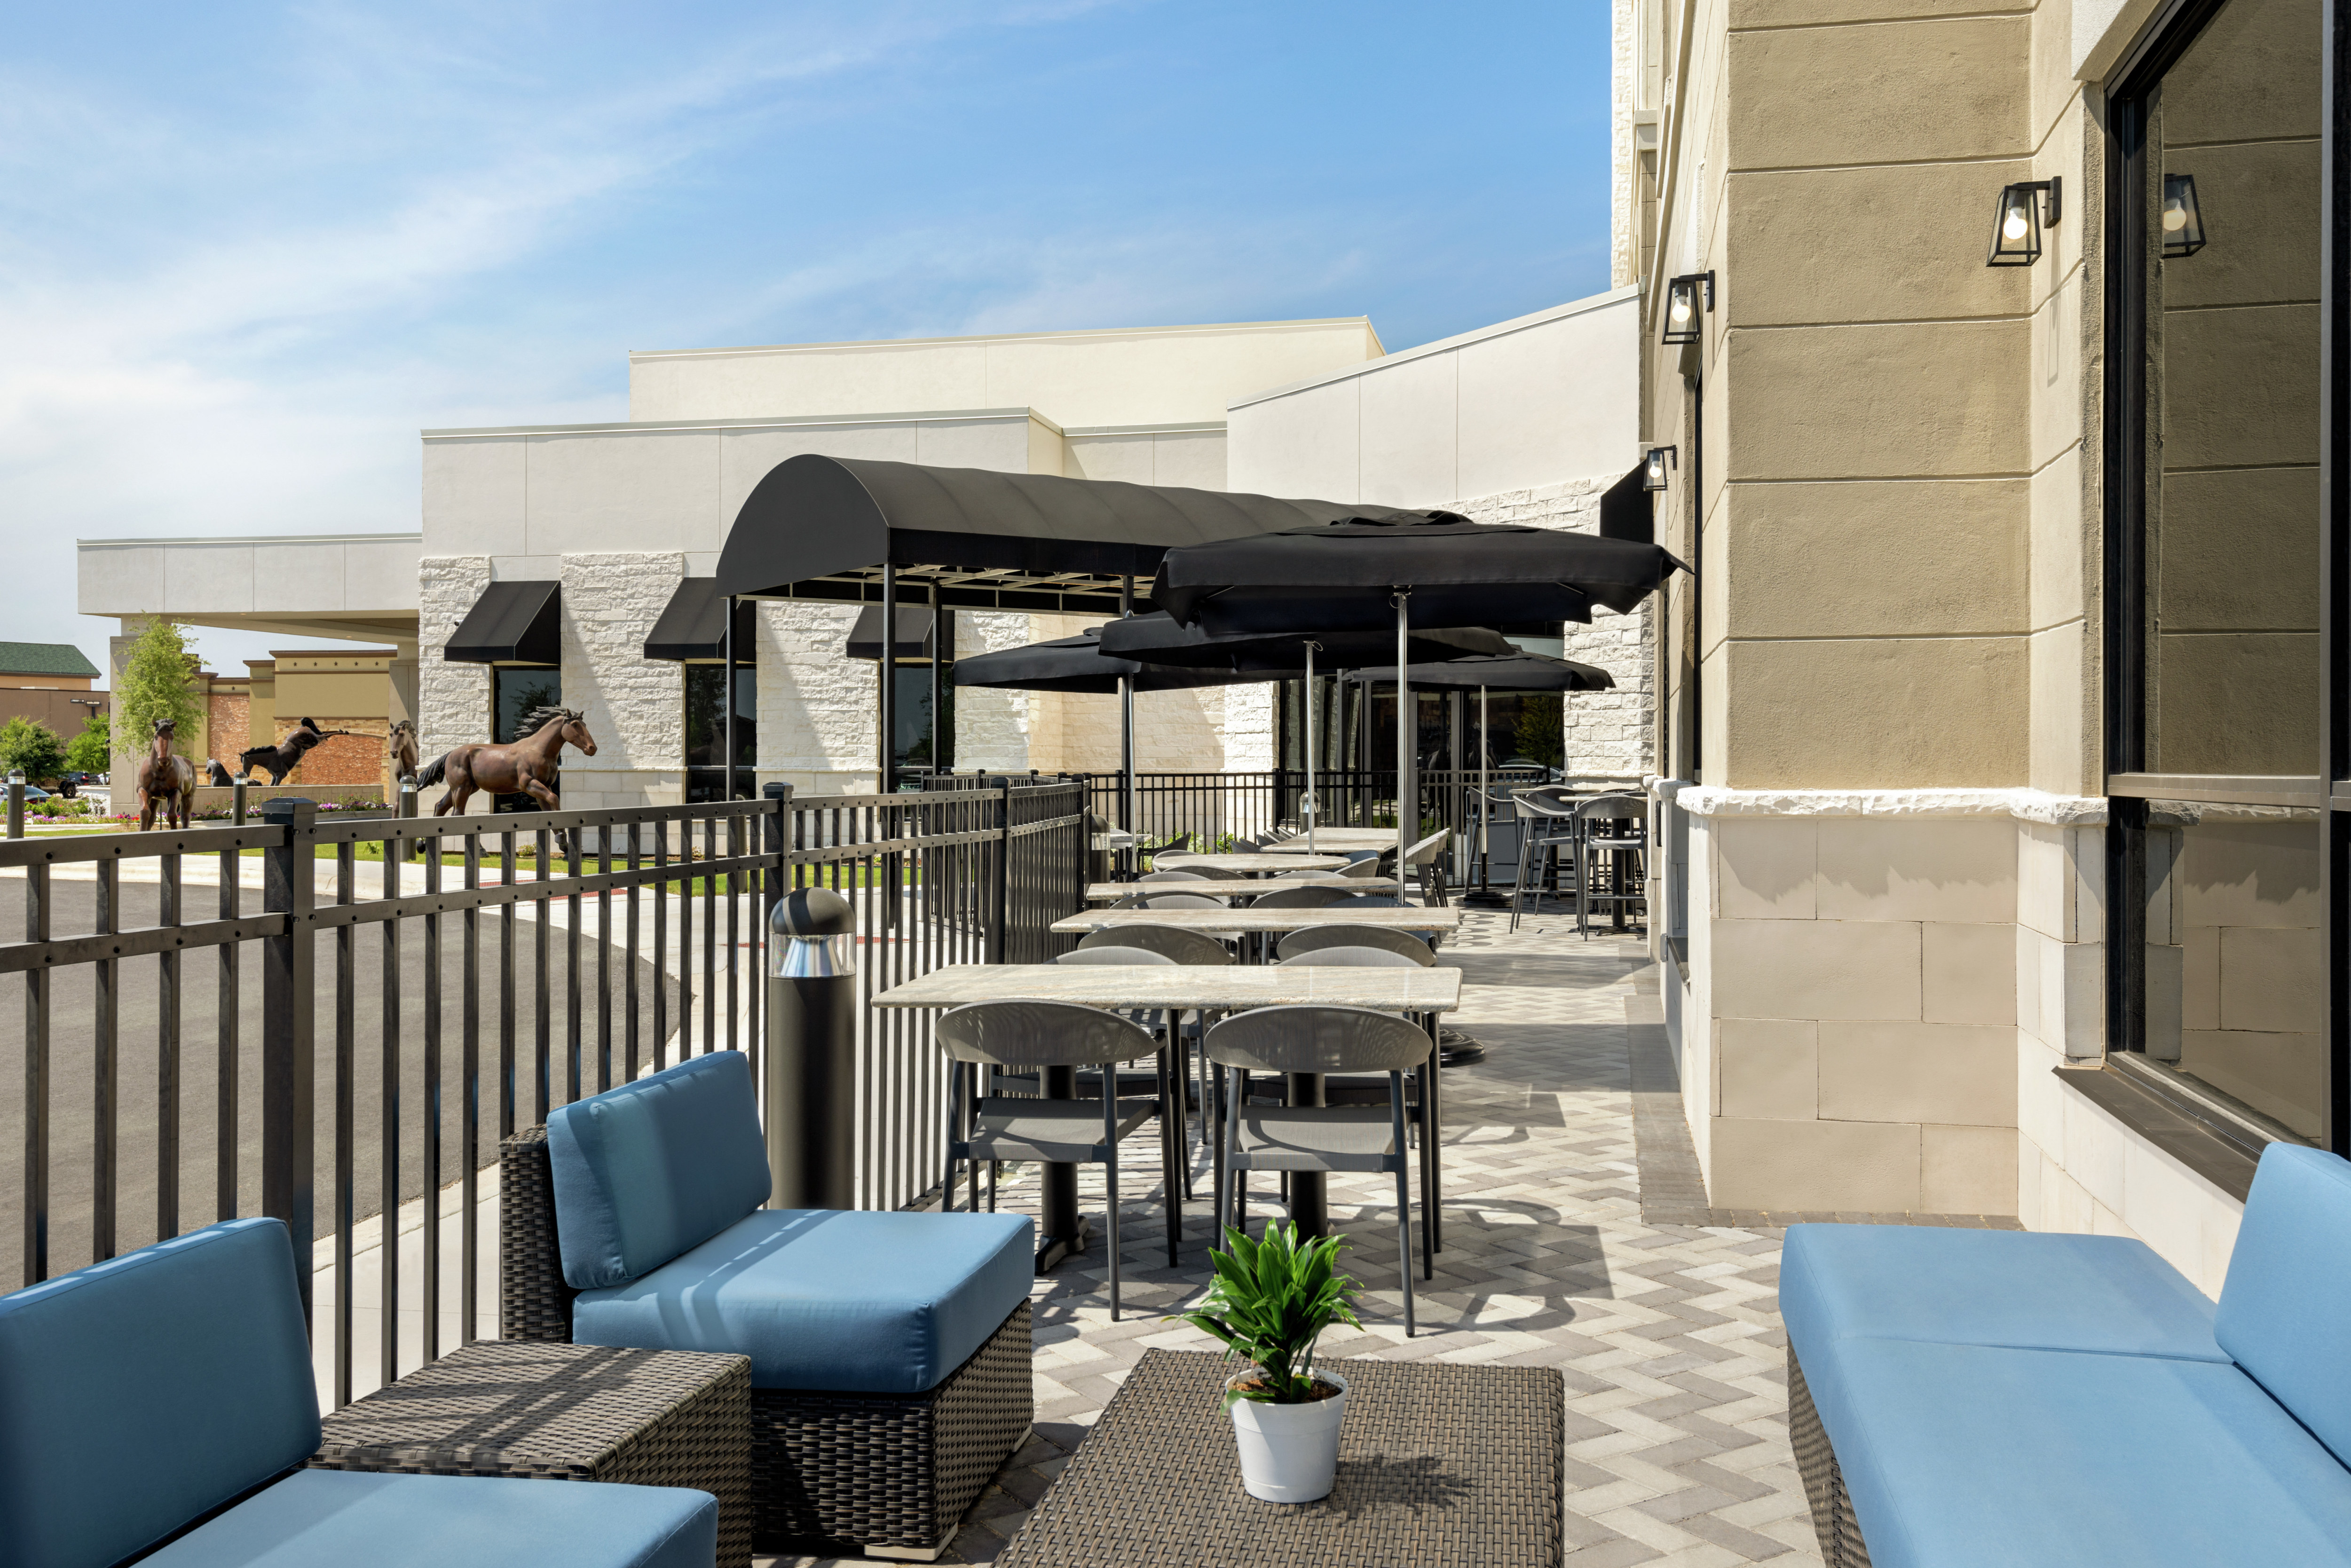 Spacious outdoor patio at on-site restaurant and bar.